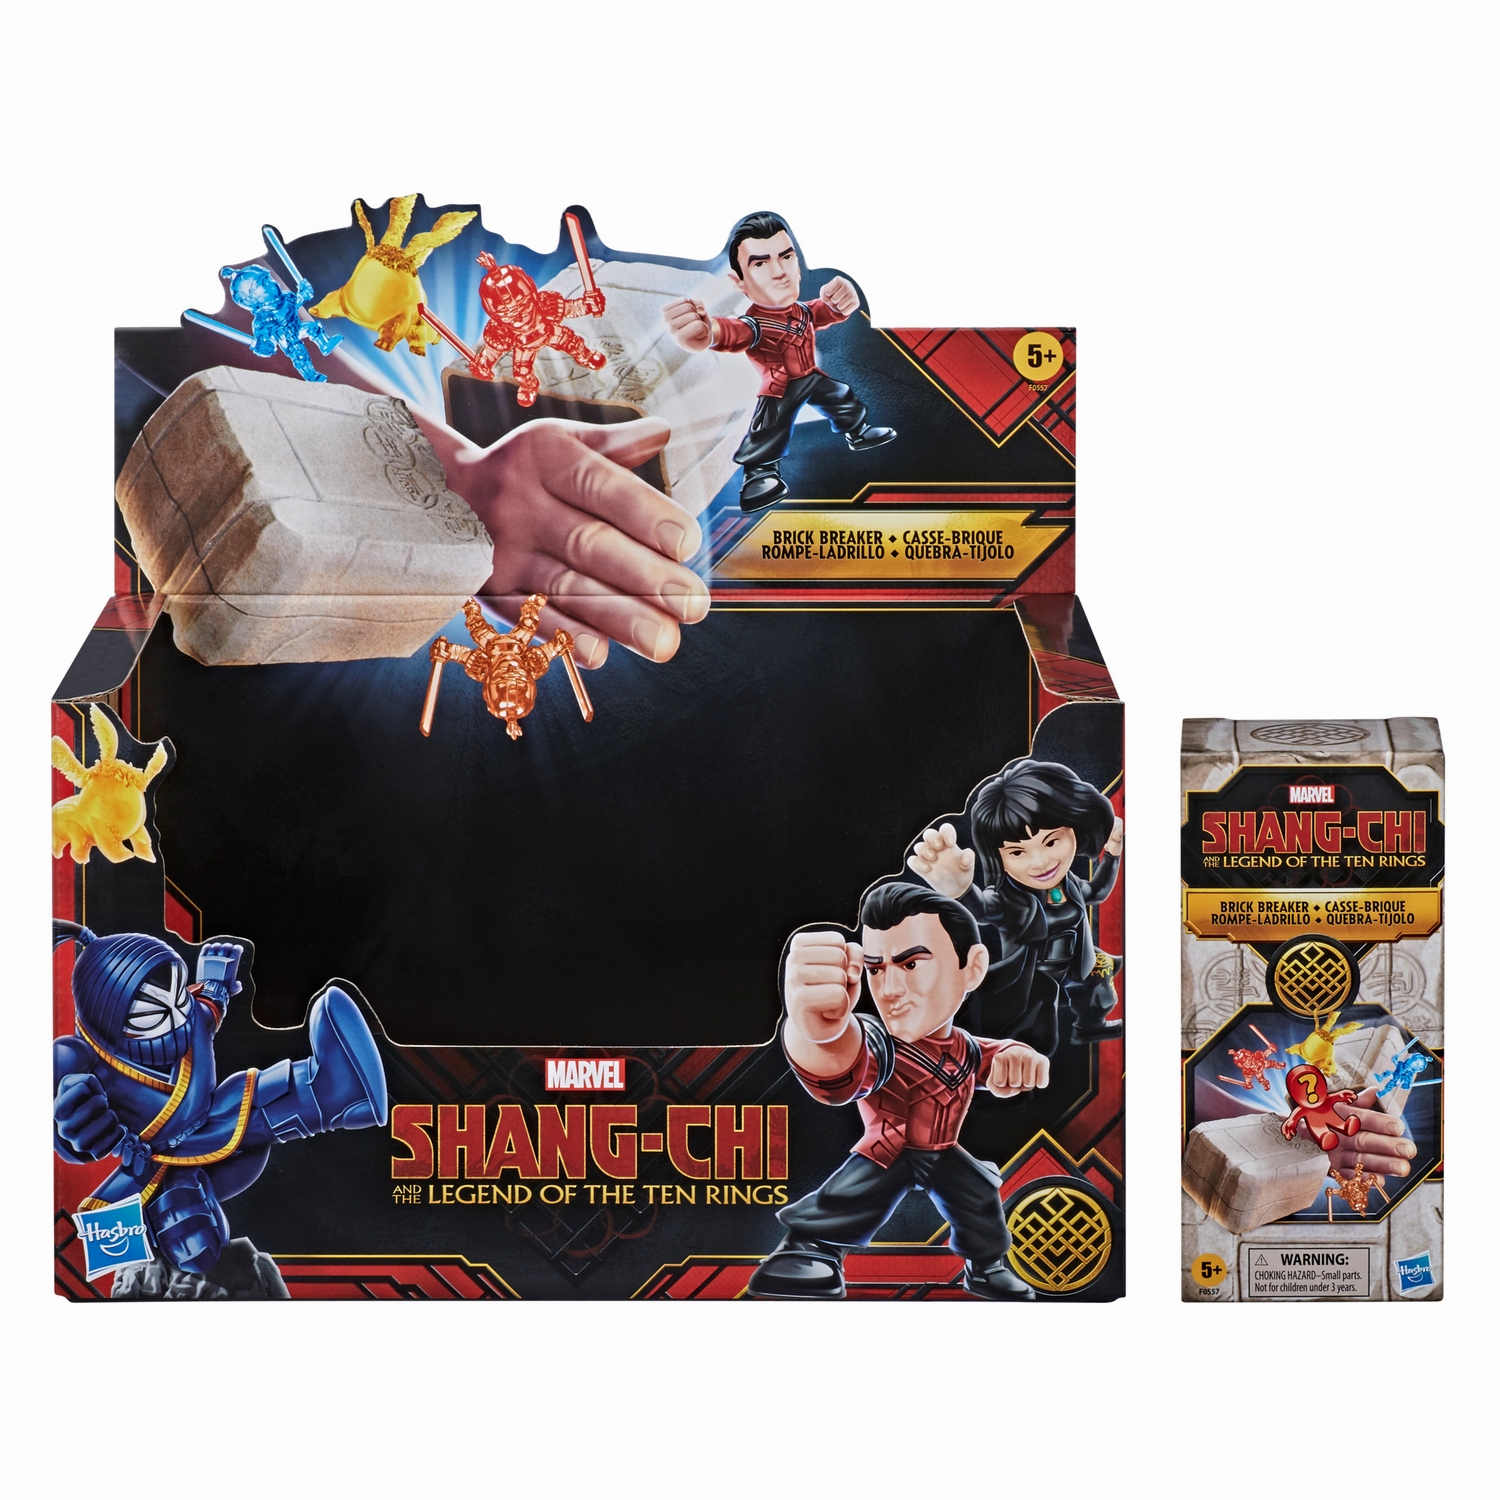 MARVEL SHANG-CHI AND THE LEGEND OF THE TEN RINGS 2-INCH BRICK BREAKERS MINI-FIGURES - pckging (4).jpg